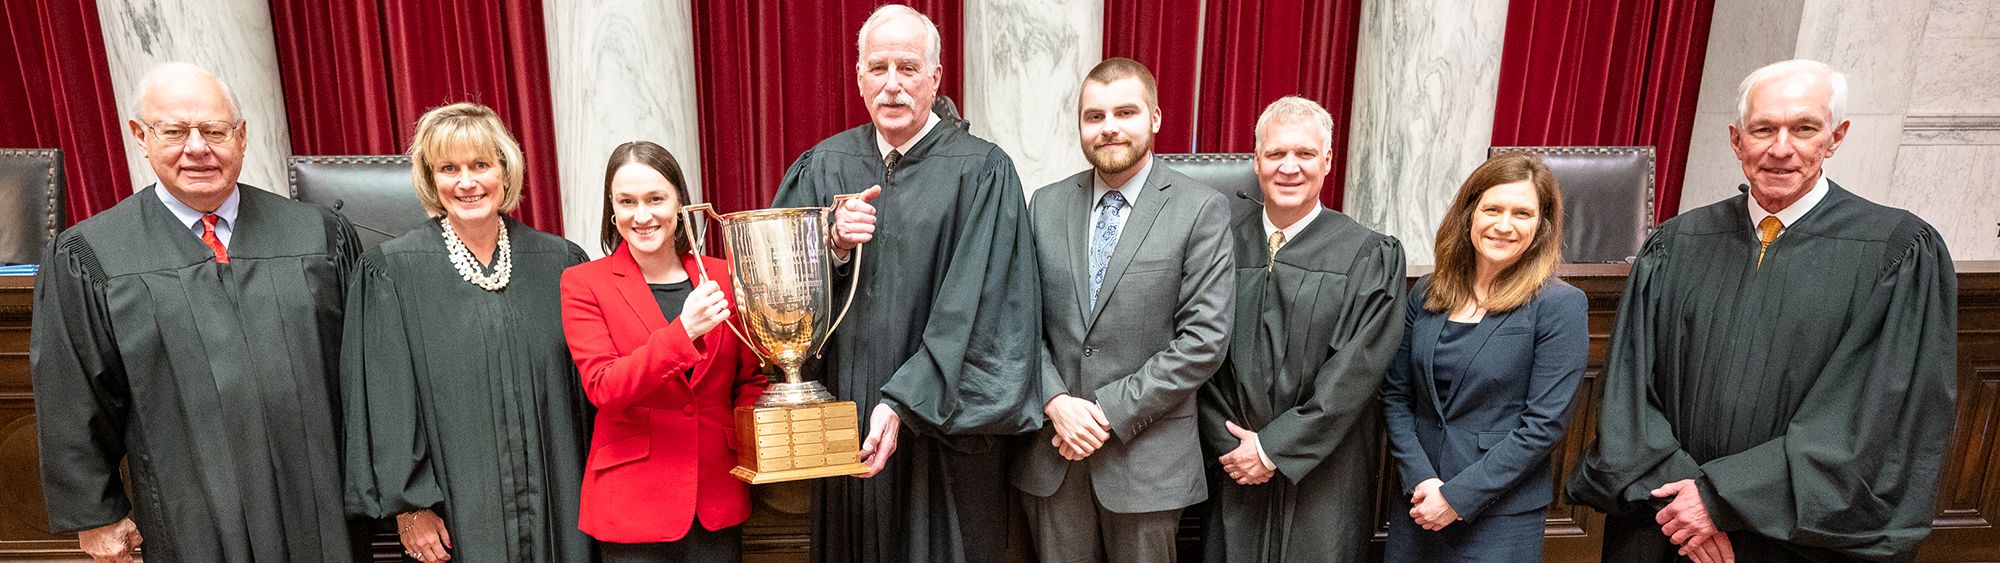 WVU Law 2022 Baker Cup finalists, Dean Rinehart, and WV Supreme Court justices